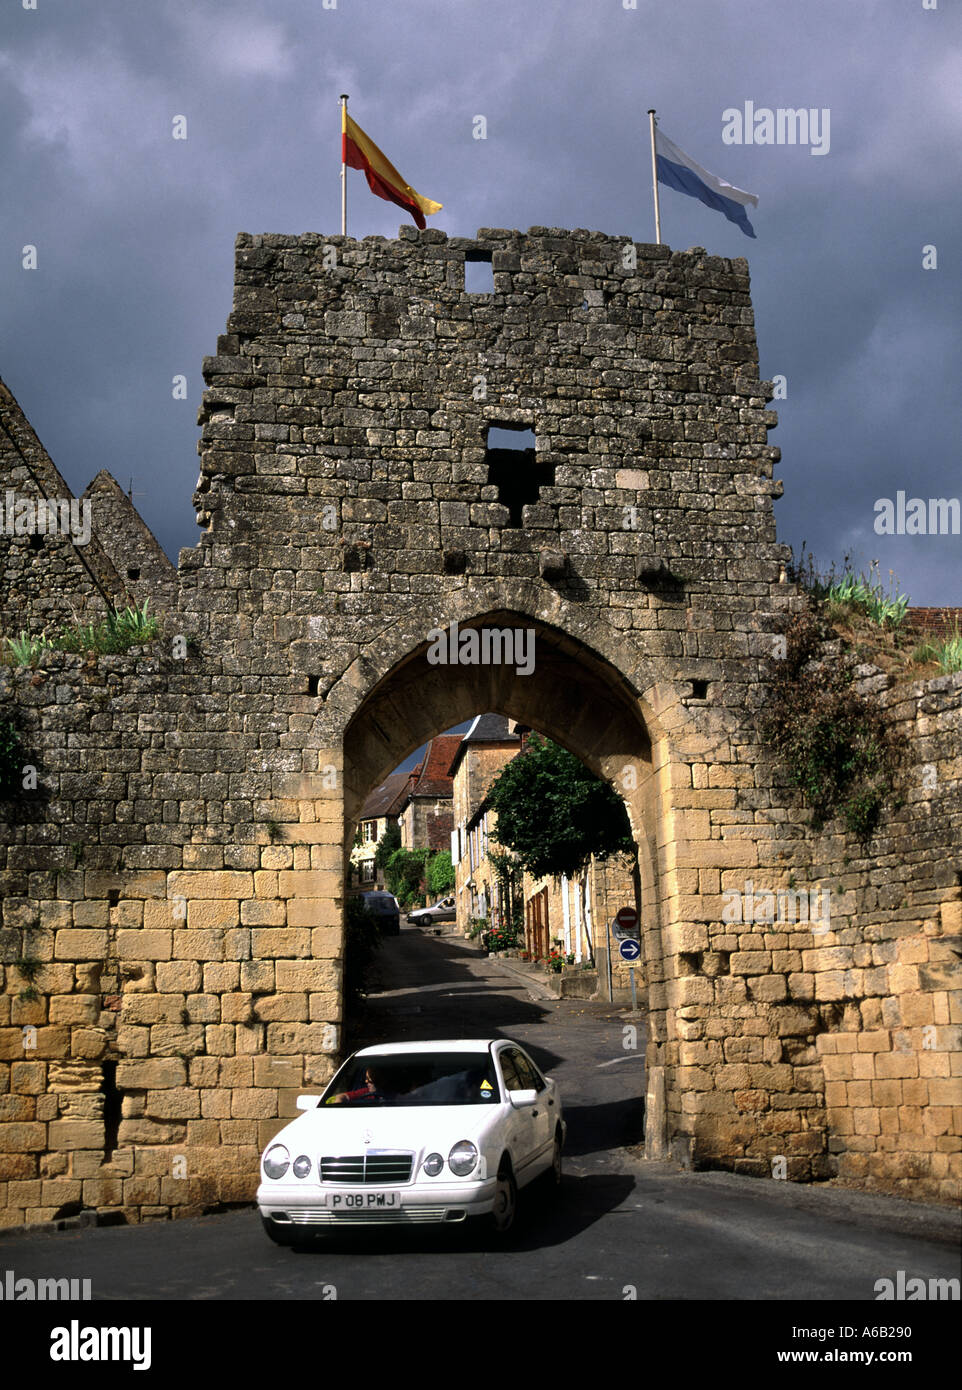 Domme Dordogne Porte Del Bos car & stone gateway arch archive street scene narrow medieval road flags on historic city wall Nouvelle Aquitaine France Stock Photo